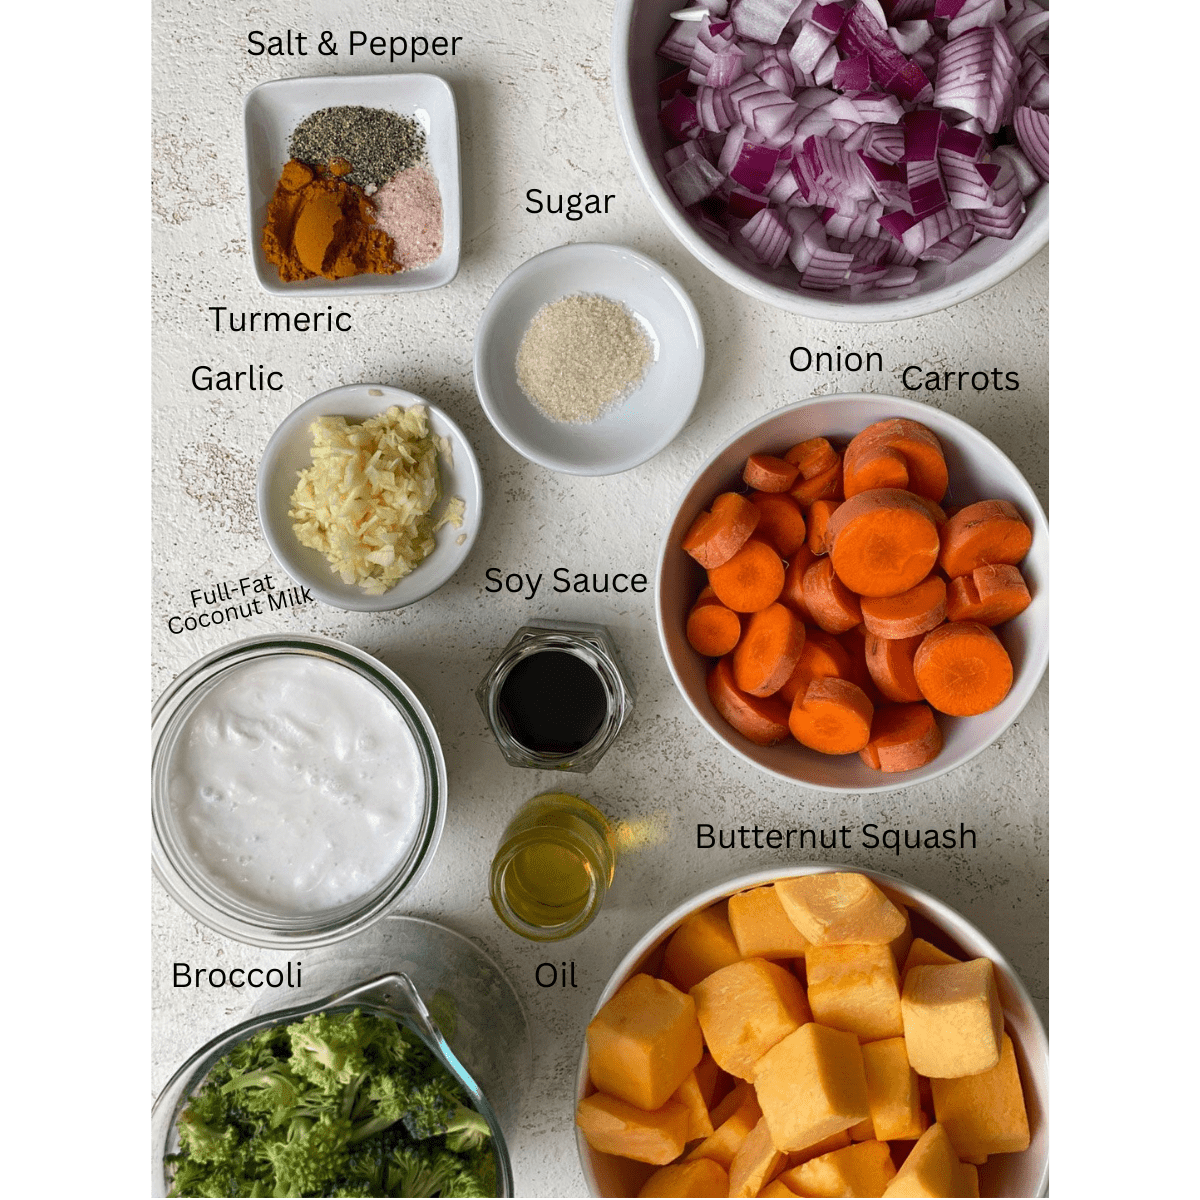 ingredients for Butternut Squash Sauce and Roasted Veggies measured out against a light surface